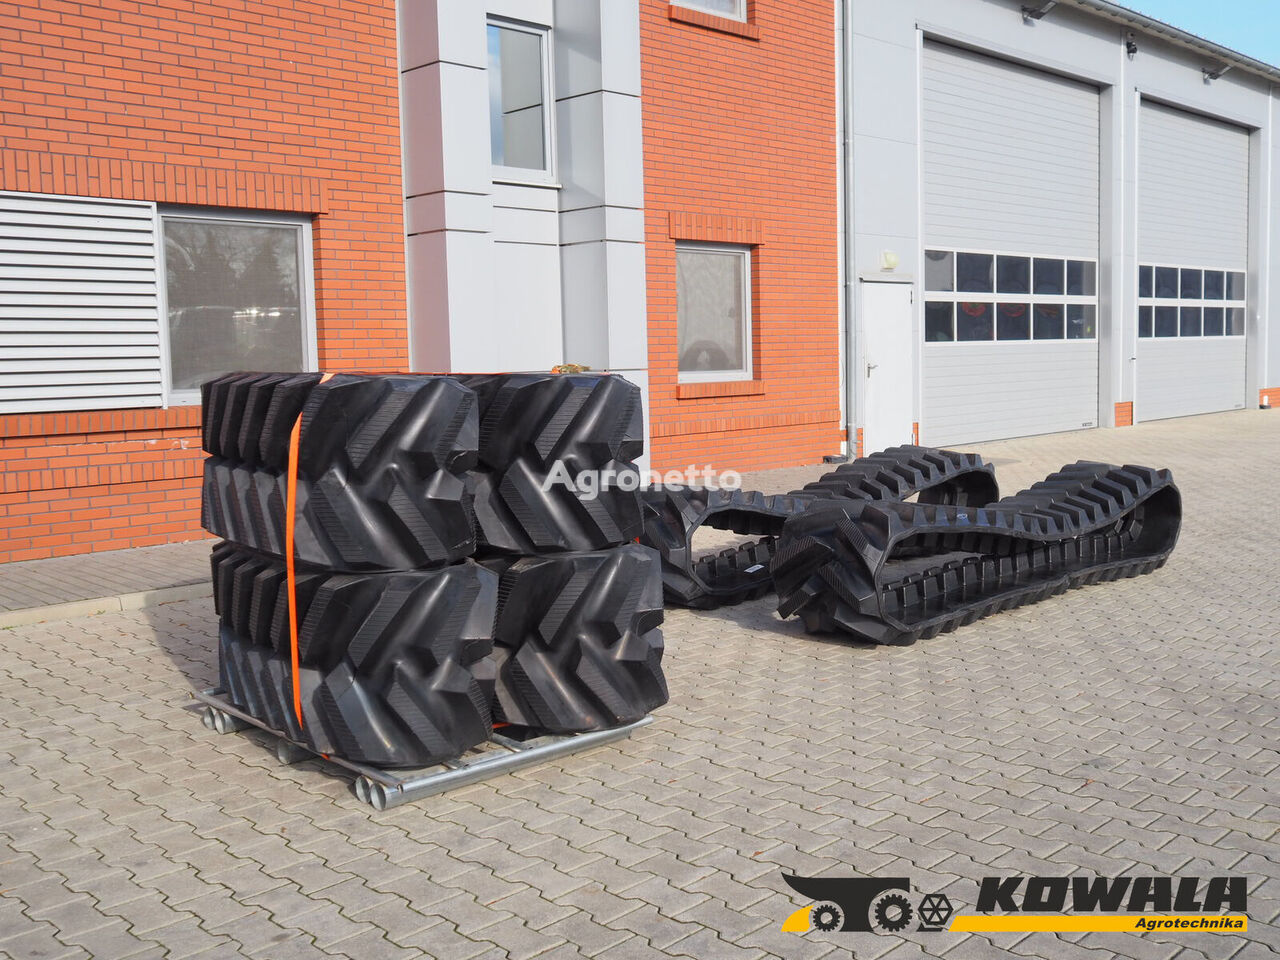 Claas Lexion / Terra Trac / 635 mm rubber track for Claas Lexion Terra Trac grain harvester